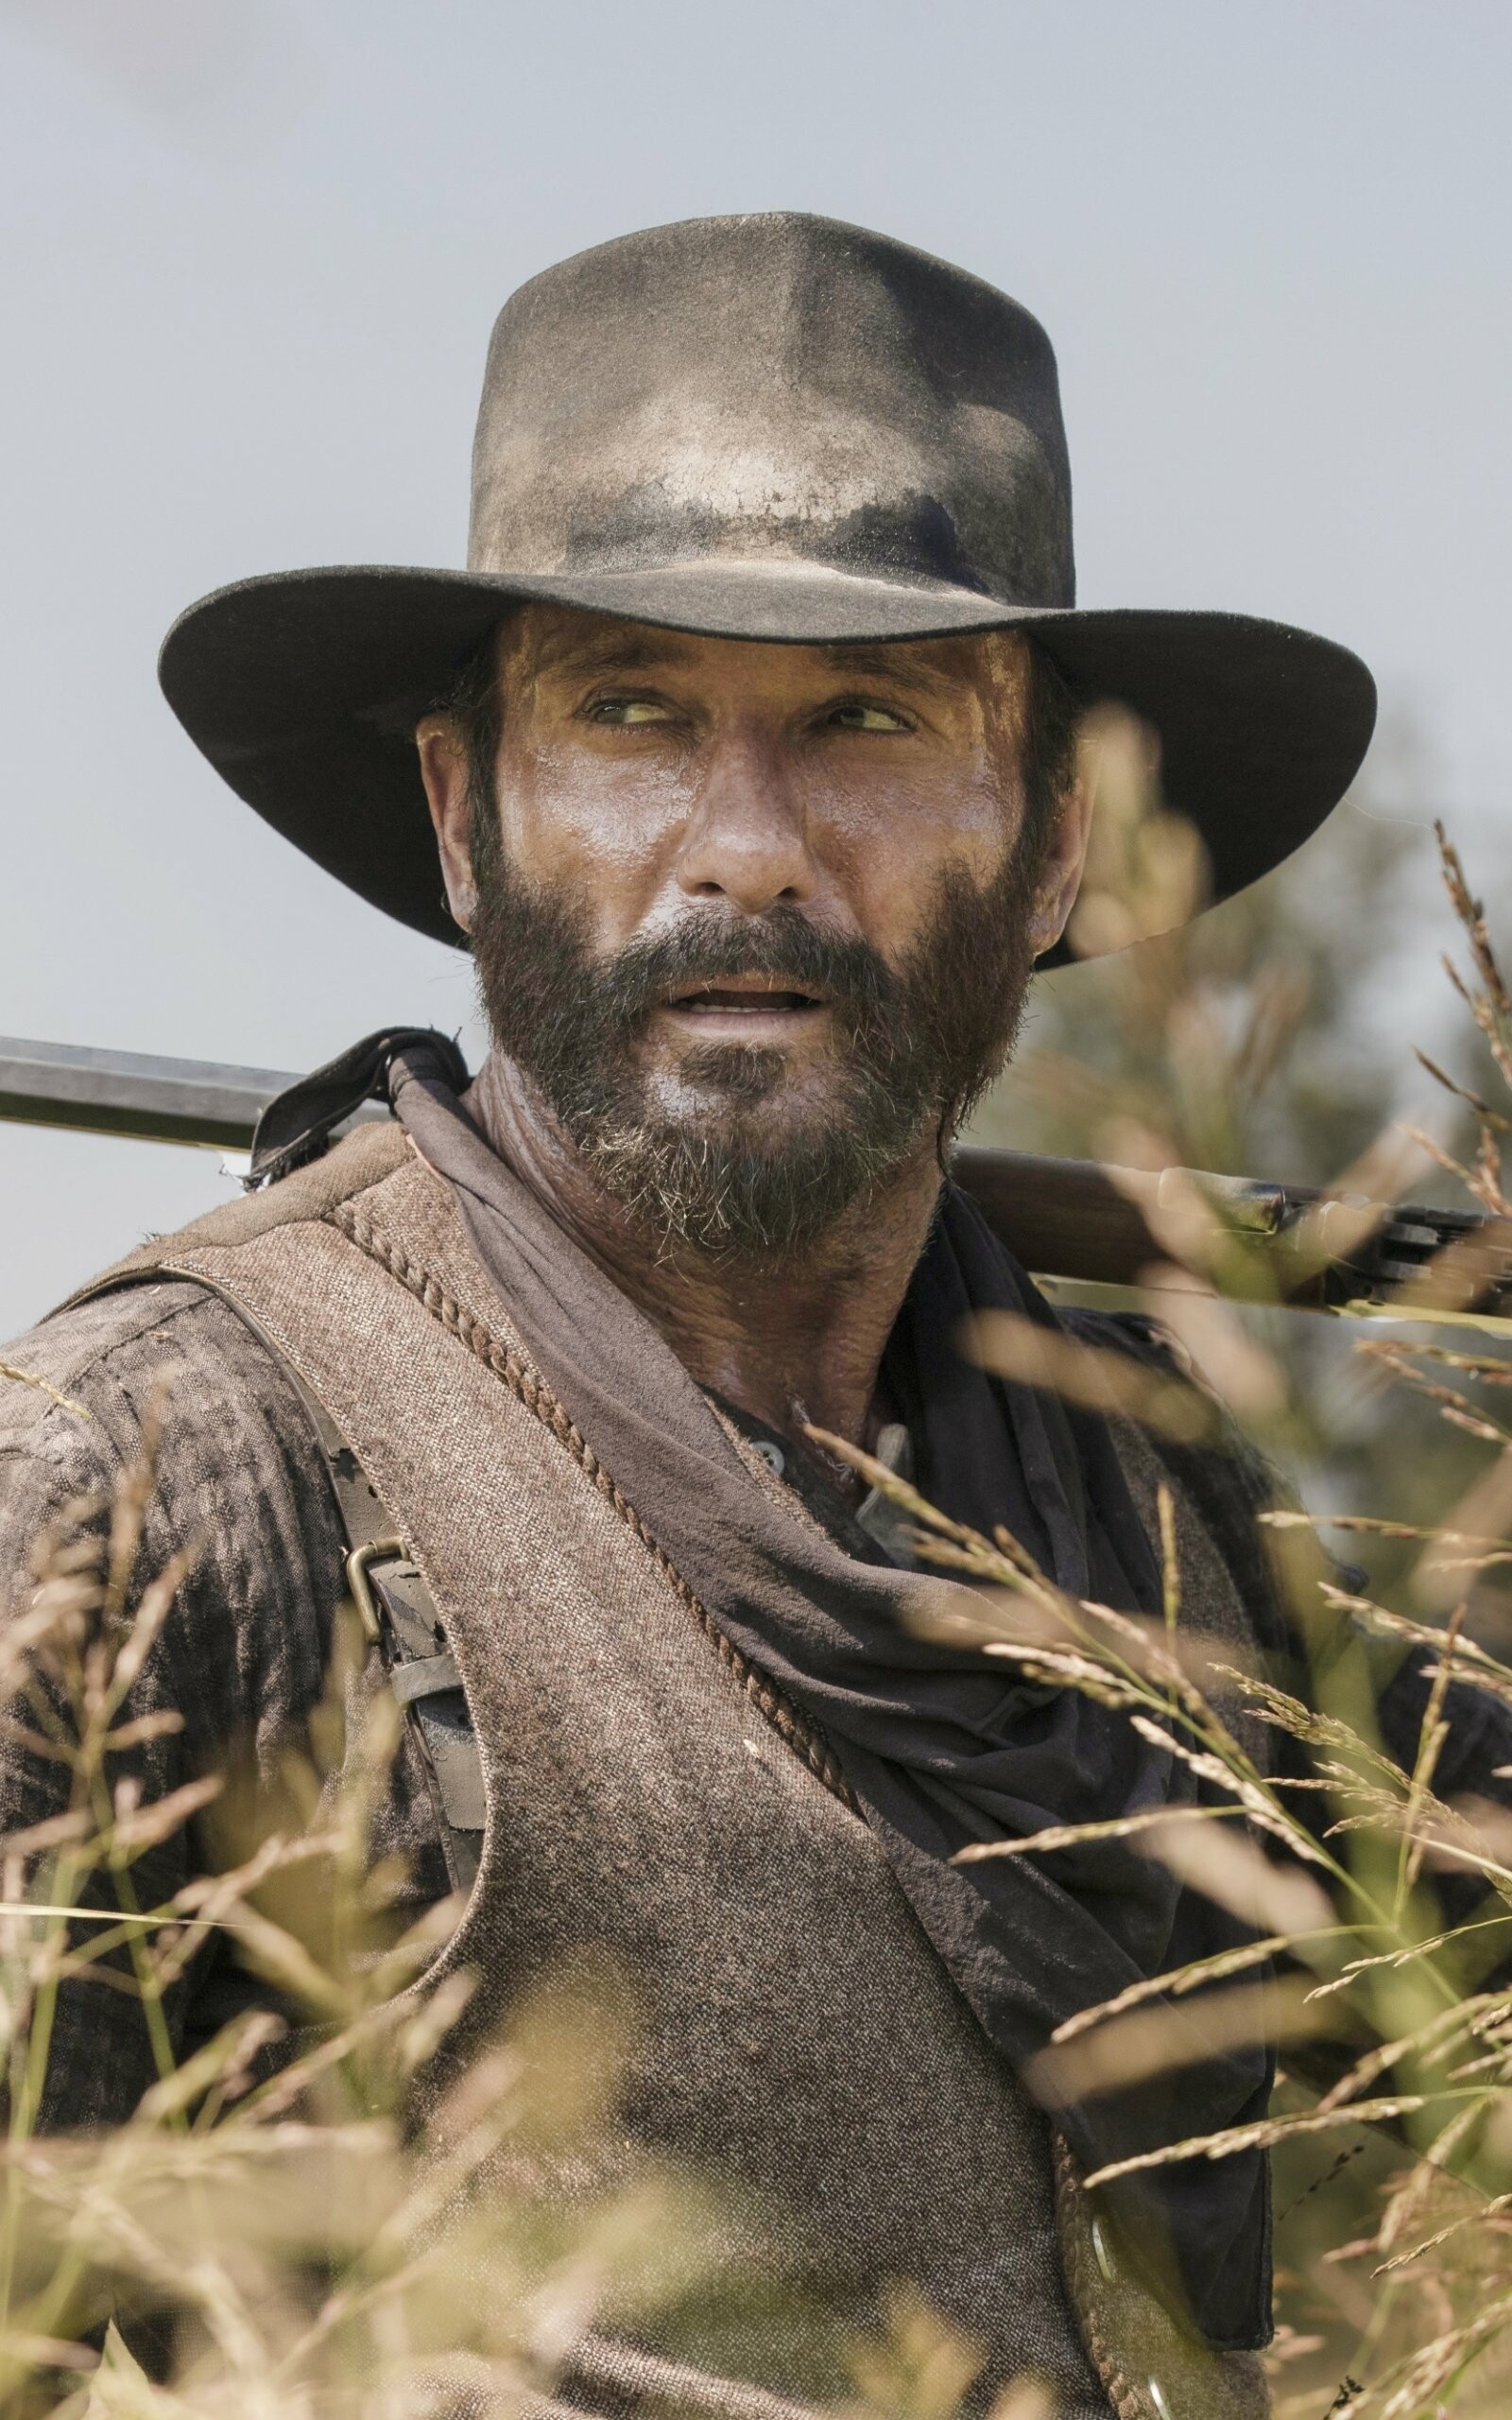 1883 (TV Series): Tim McGraw as James Dutton, A captain in the Confederate States Army during the Civil War. 1600x2560 HD Wallpaper.